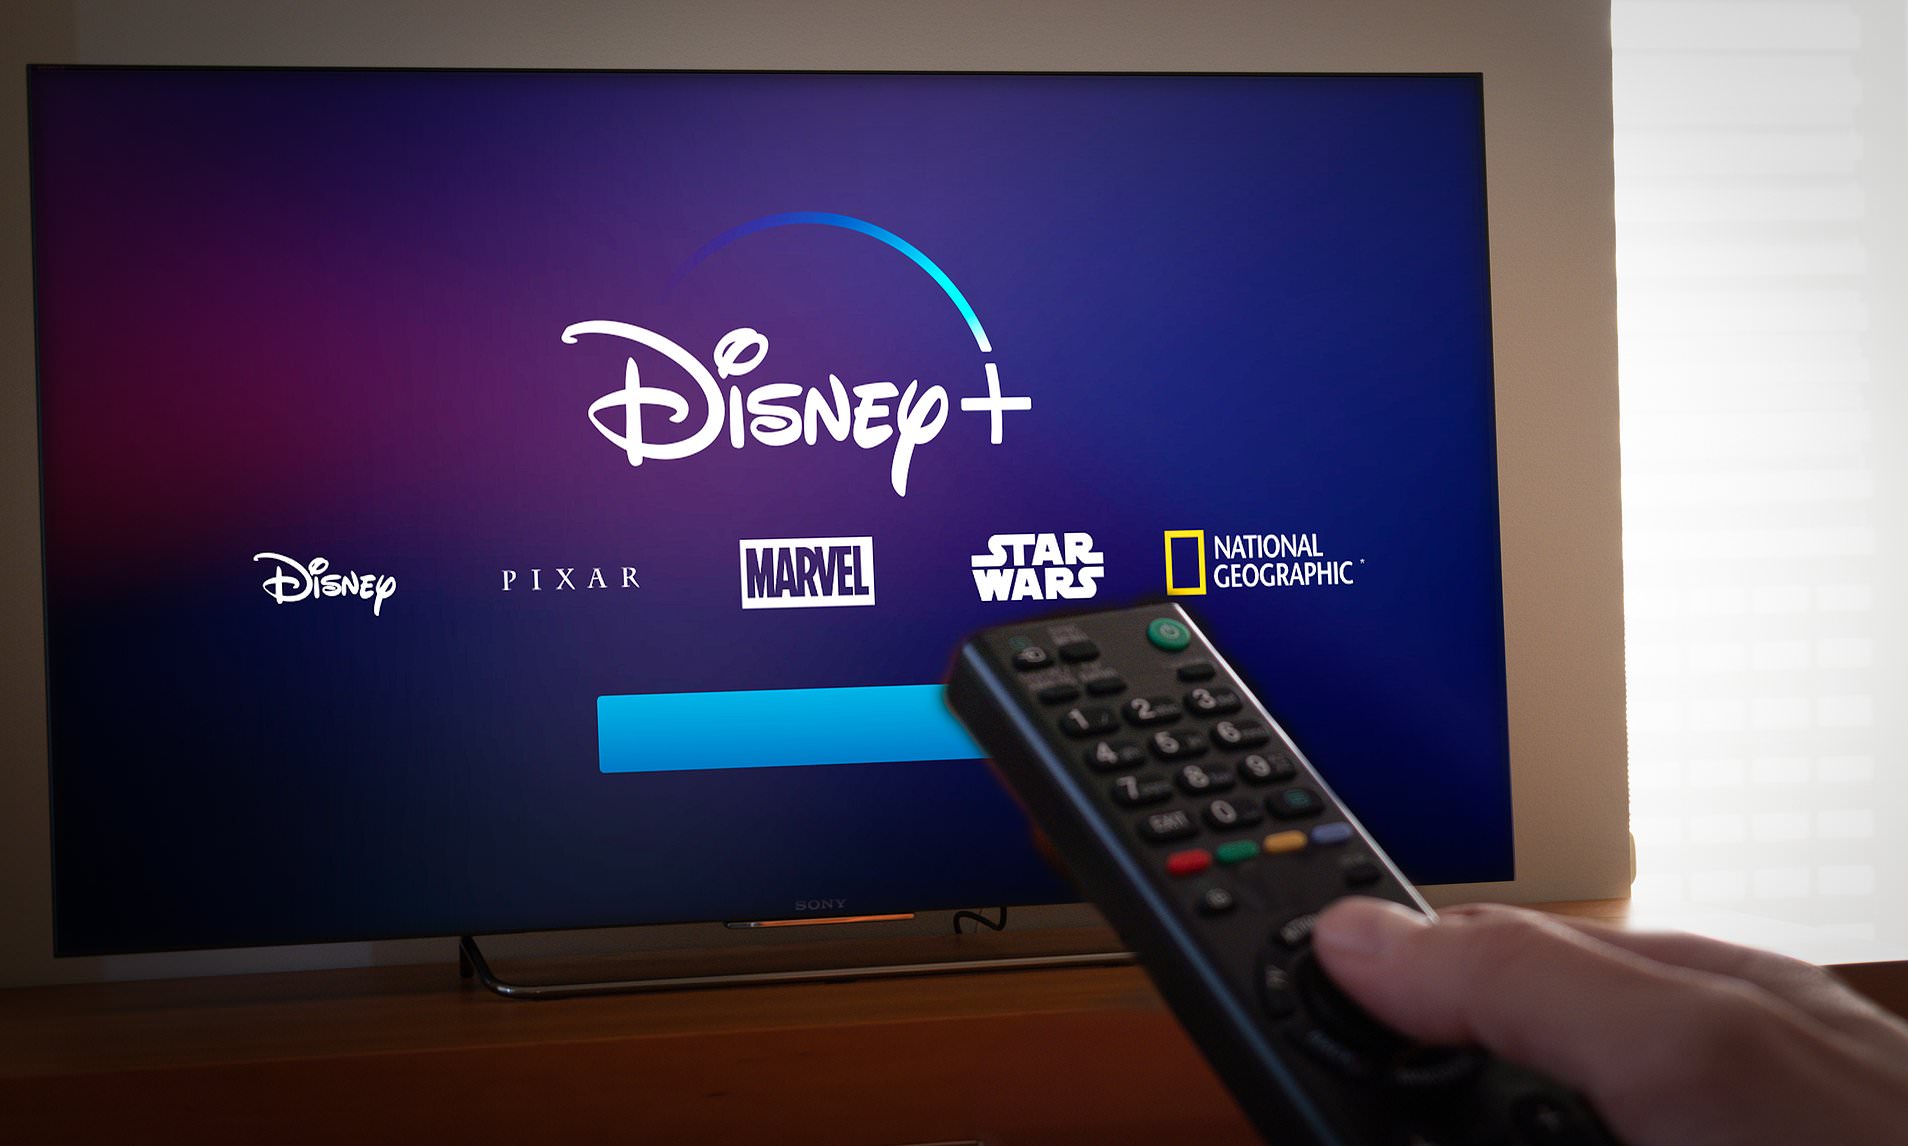 Image of Disney Plus being watched on a TV with a hand holding a remote control